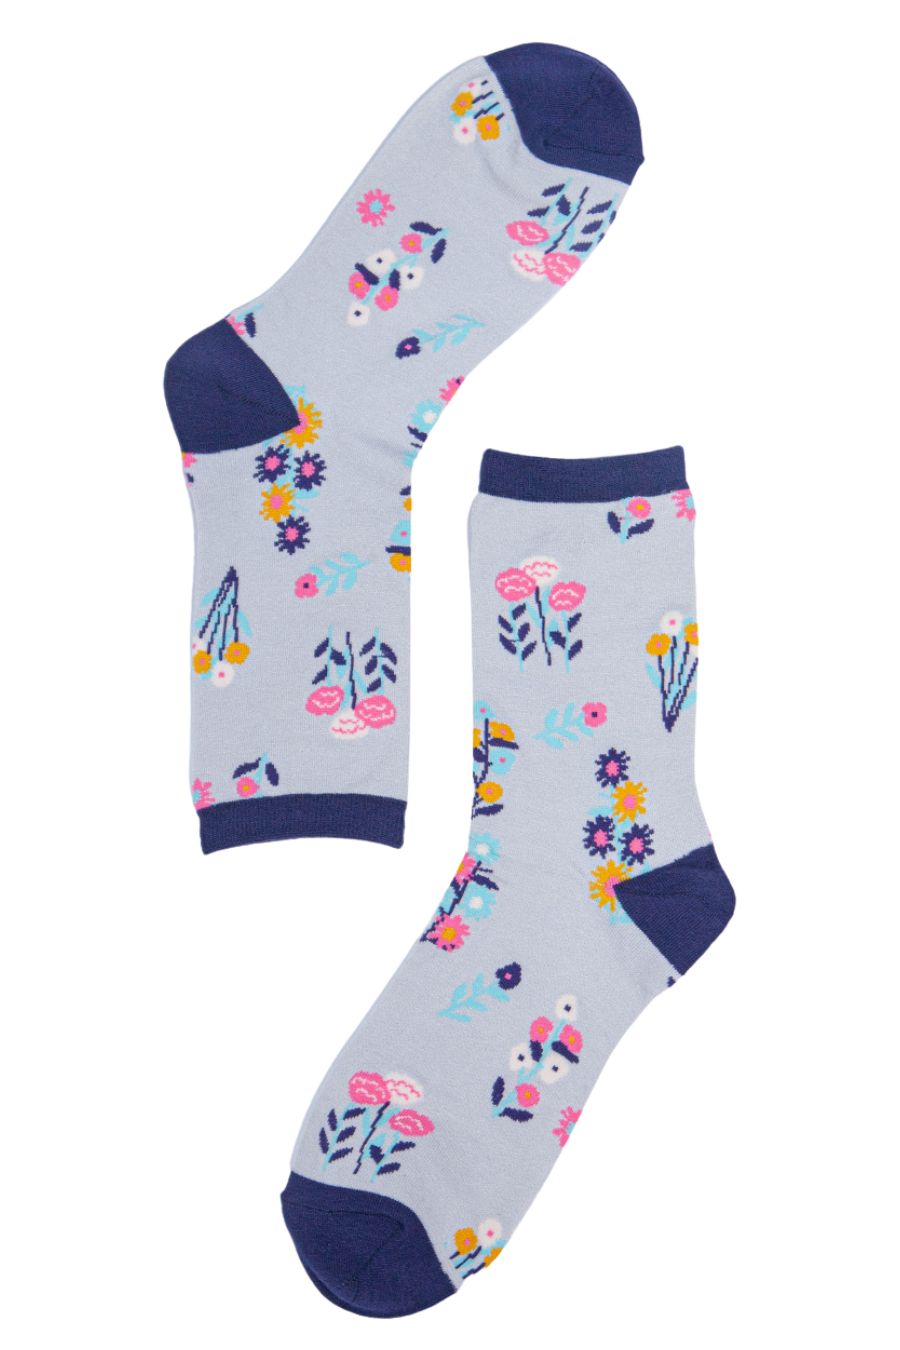 grey ankle socks with a colourful wild flower print